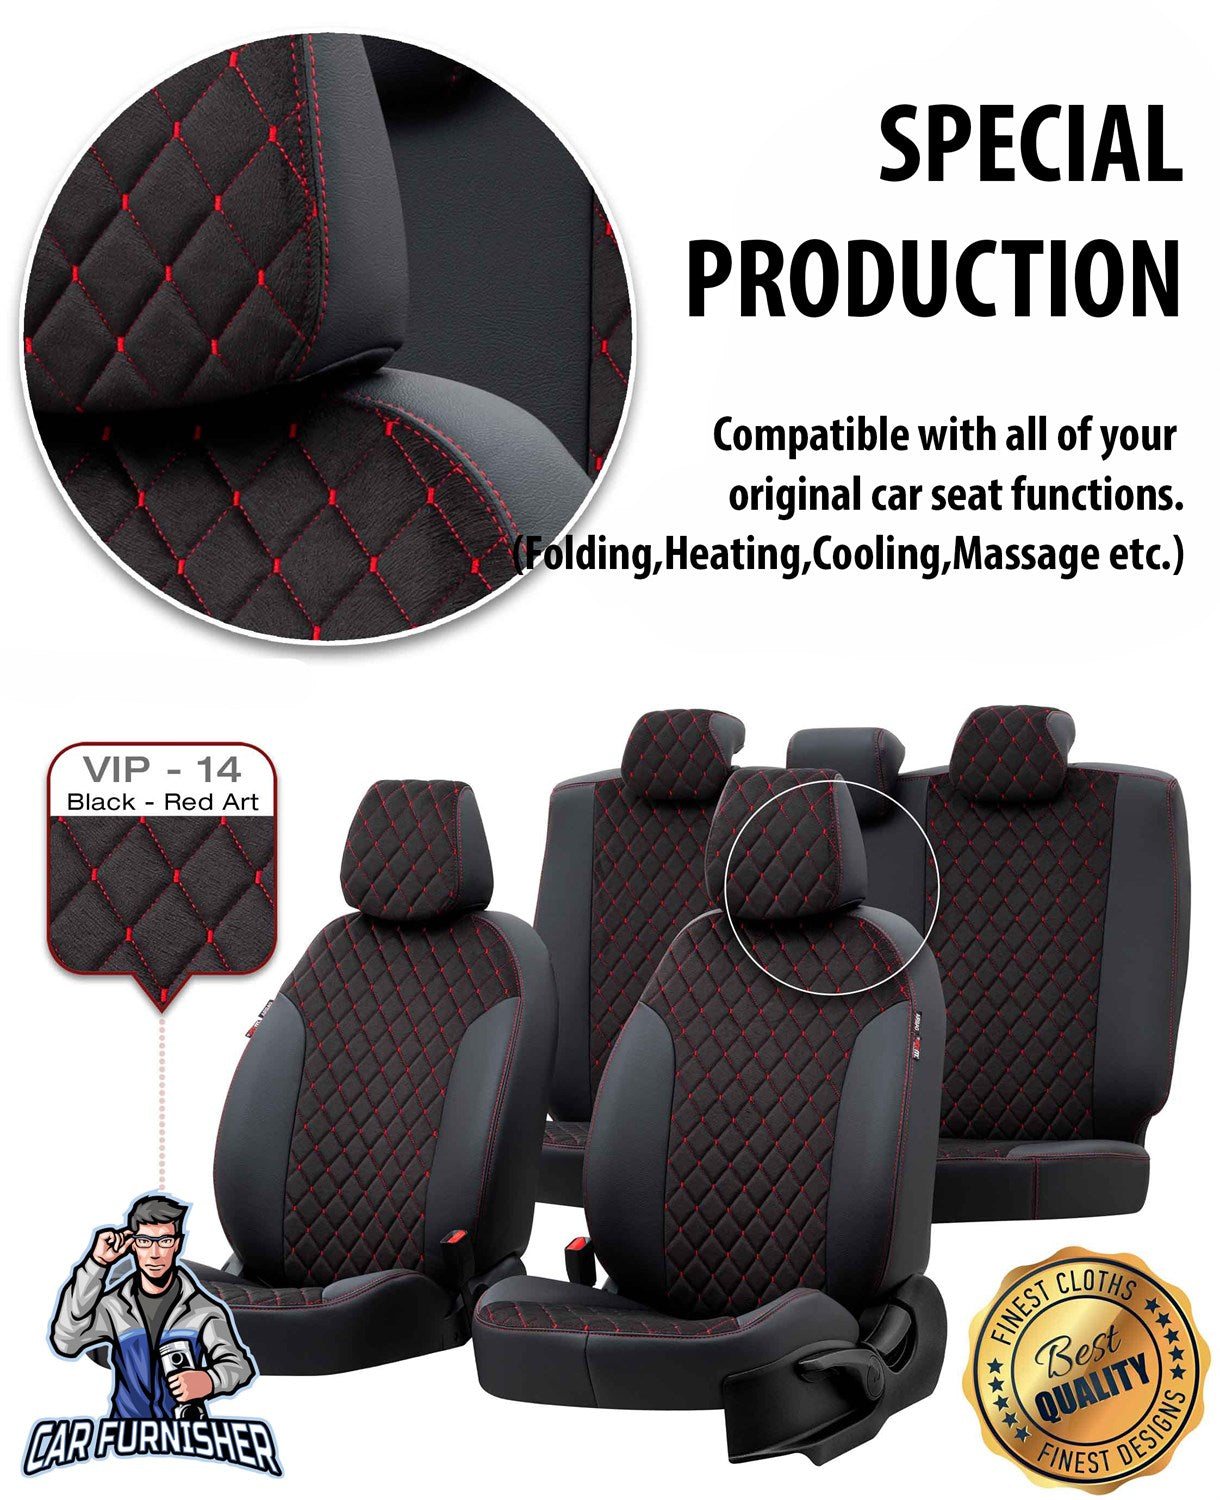 Tata Xenon Seat Covers Madrid Foal Feather Design Dark Red Leather & Foal Feather